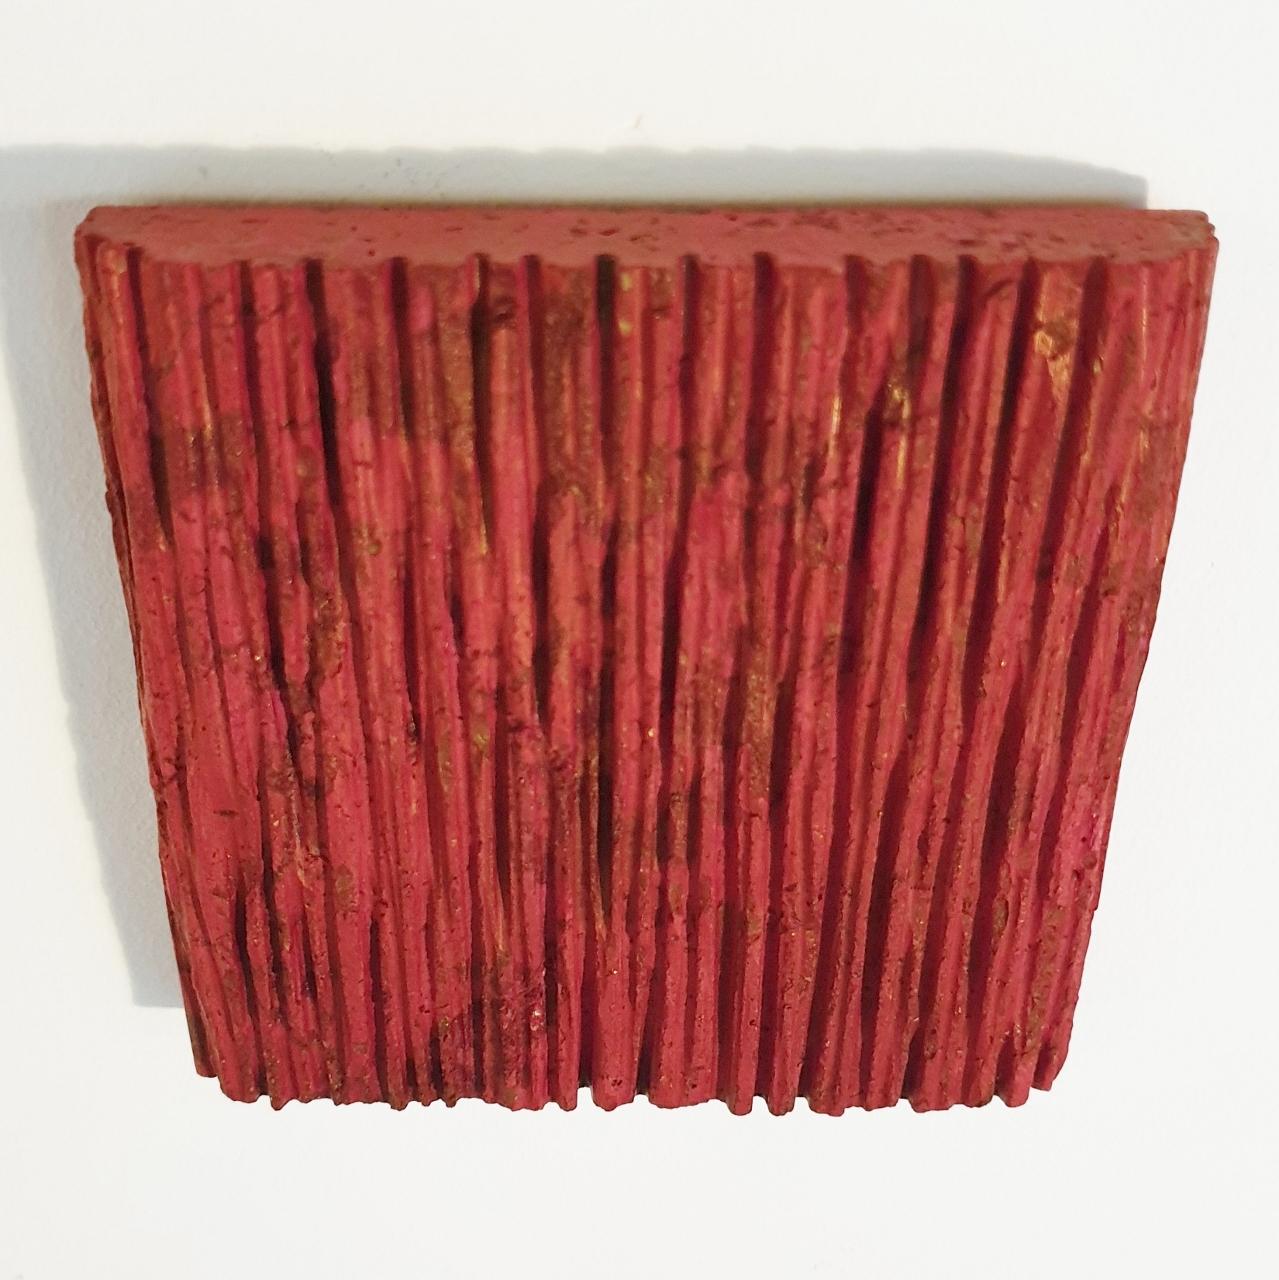 o.T. (Rd15Vt) & o.T. (Bk15Cr) are unique small size contemporary modern wall sculptures by German artist Dieter Kränzlein, together making up a unique diptych. The sculptures are made from limestone and are finished with a thin layer of red & black